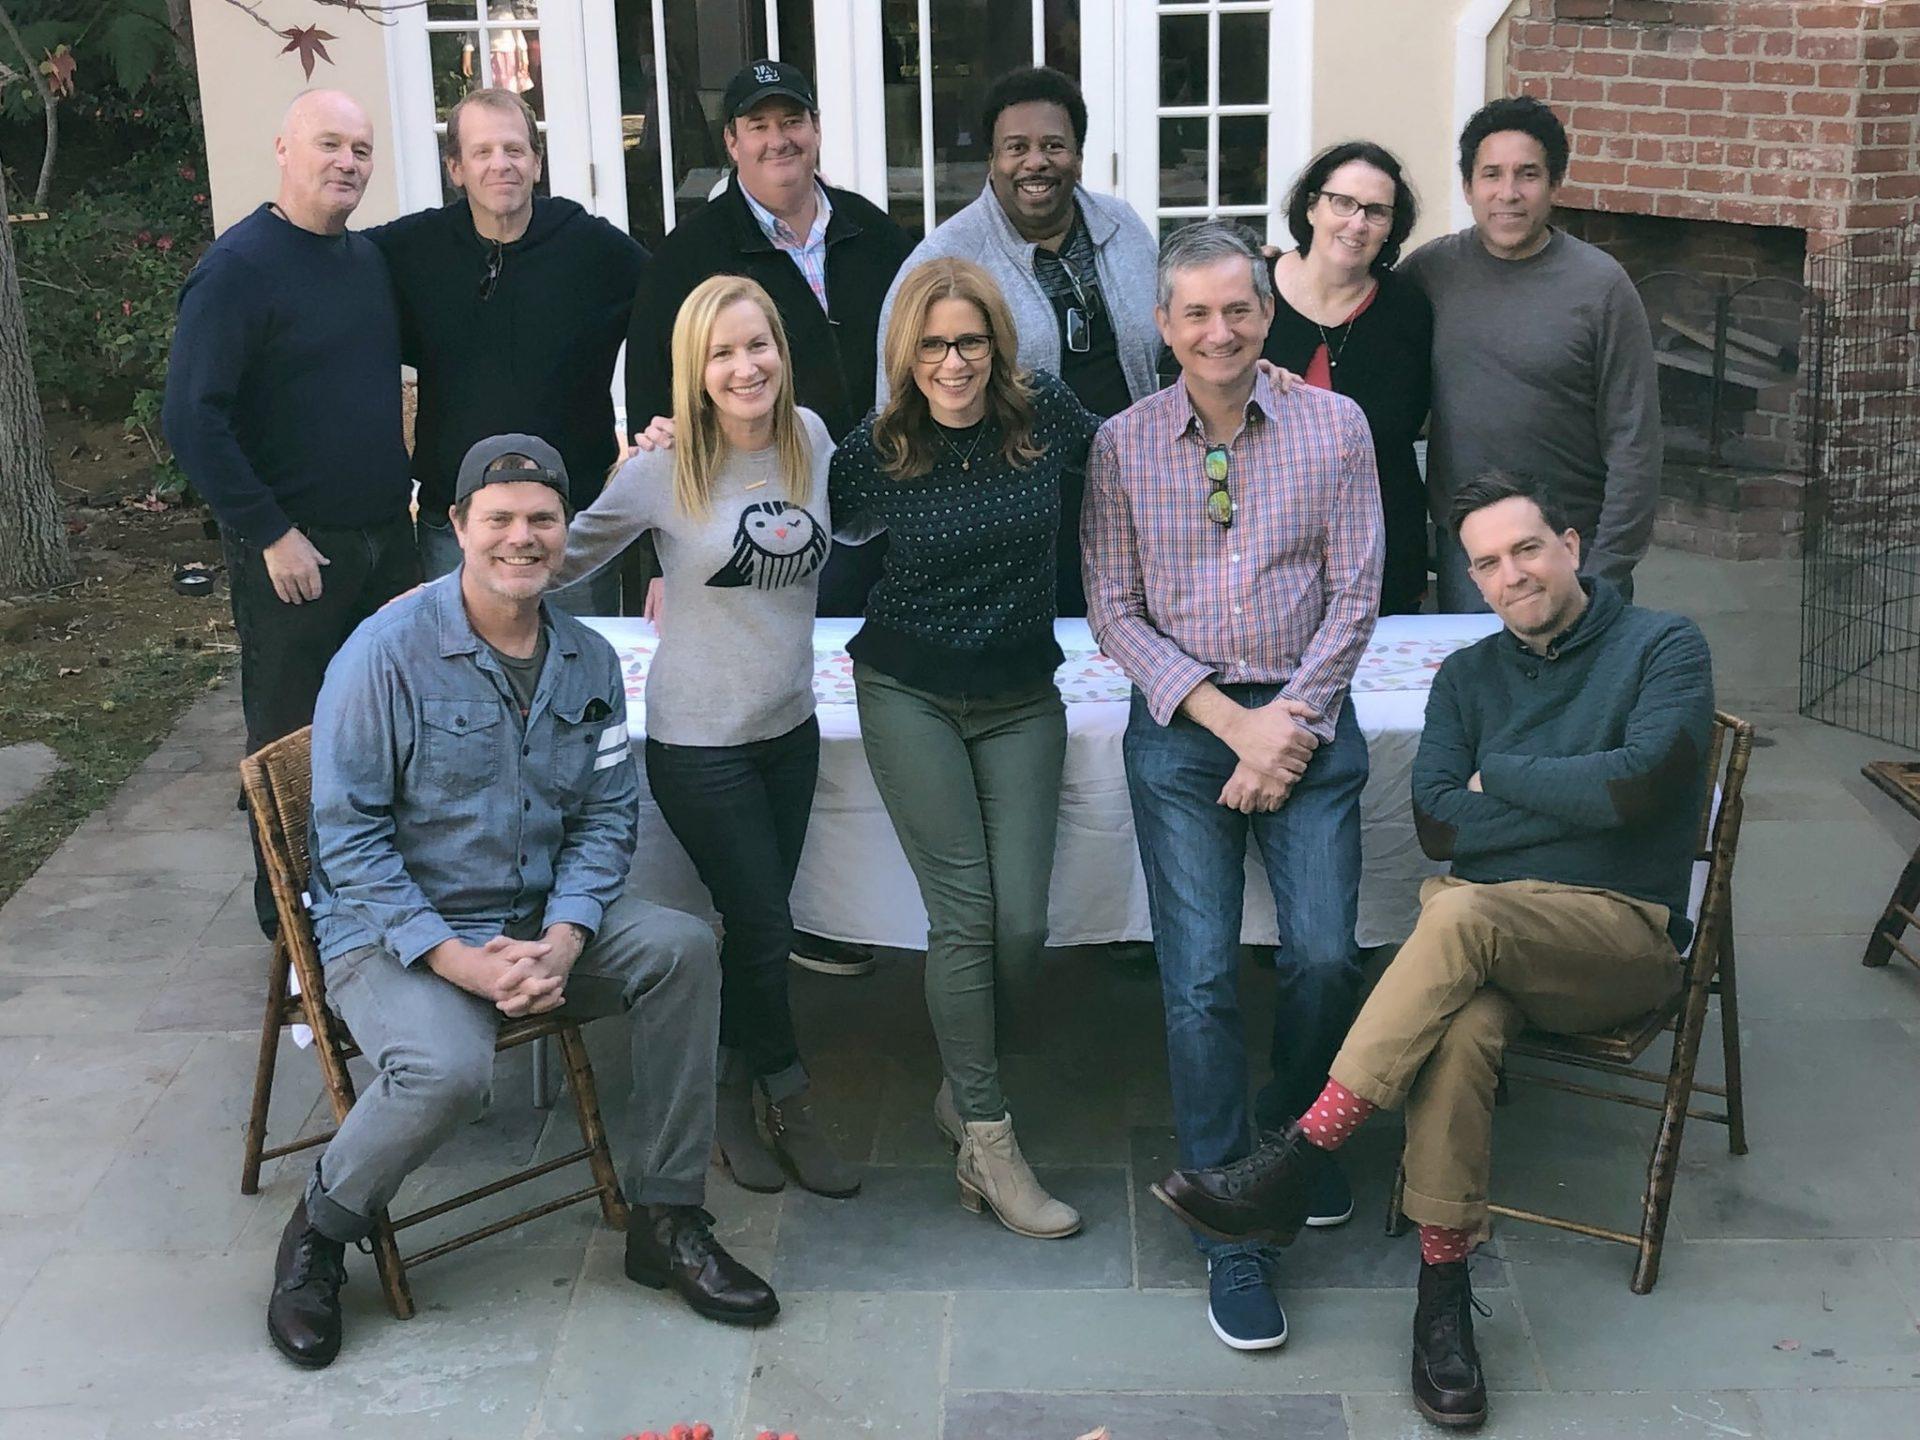 The Office US cast reunited